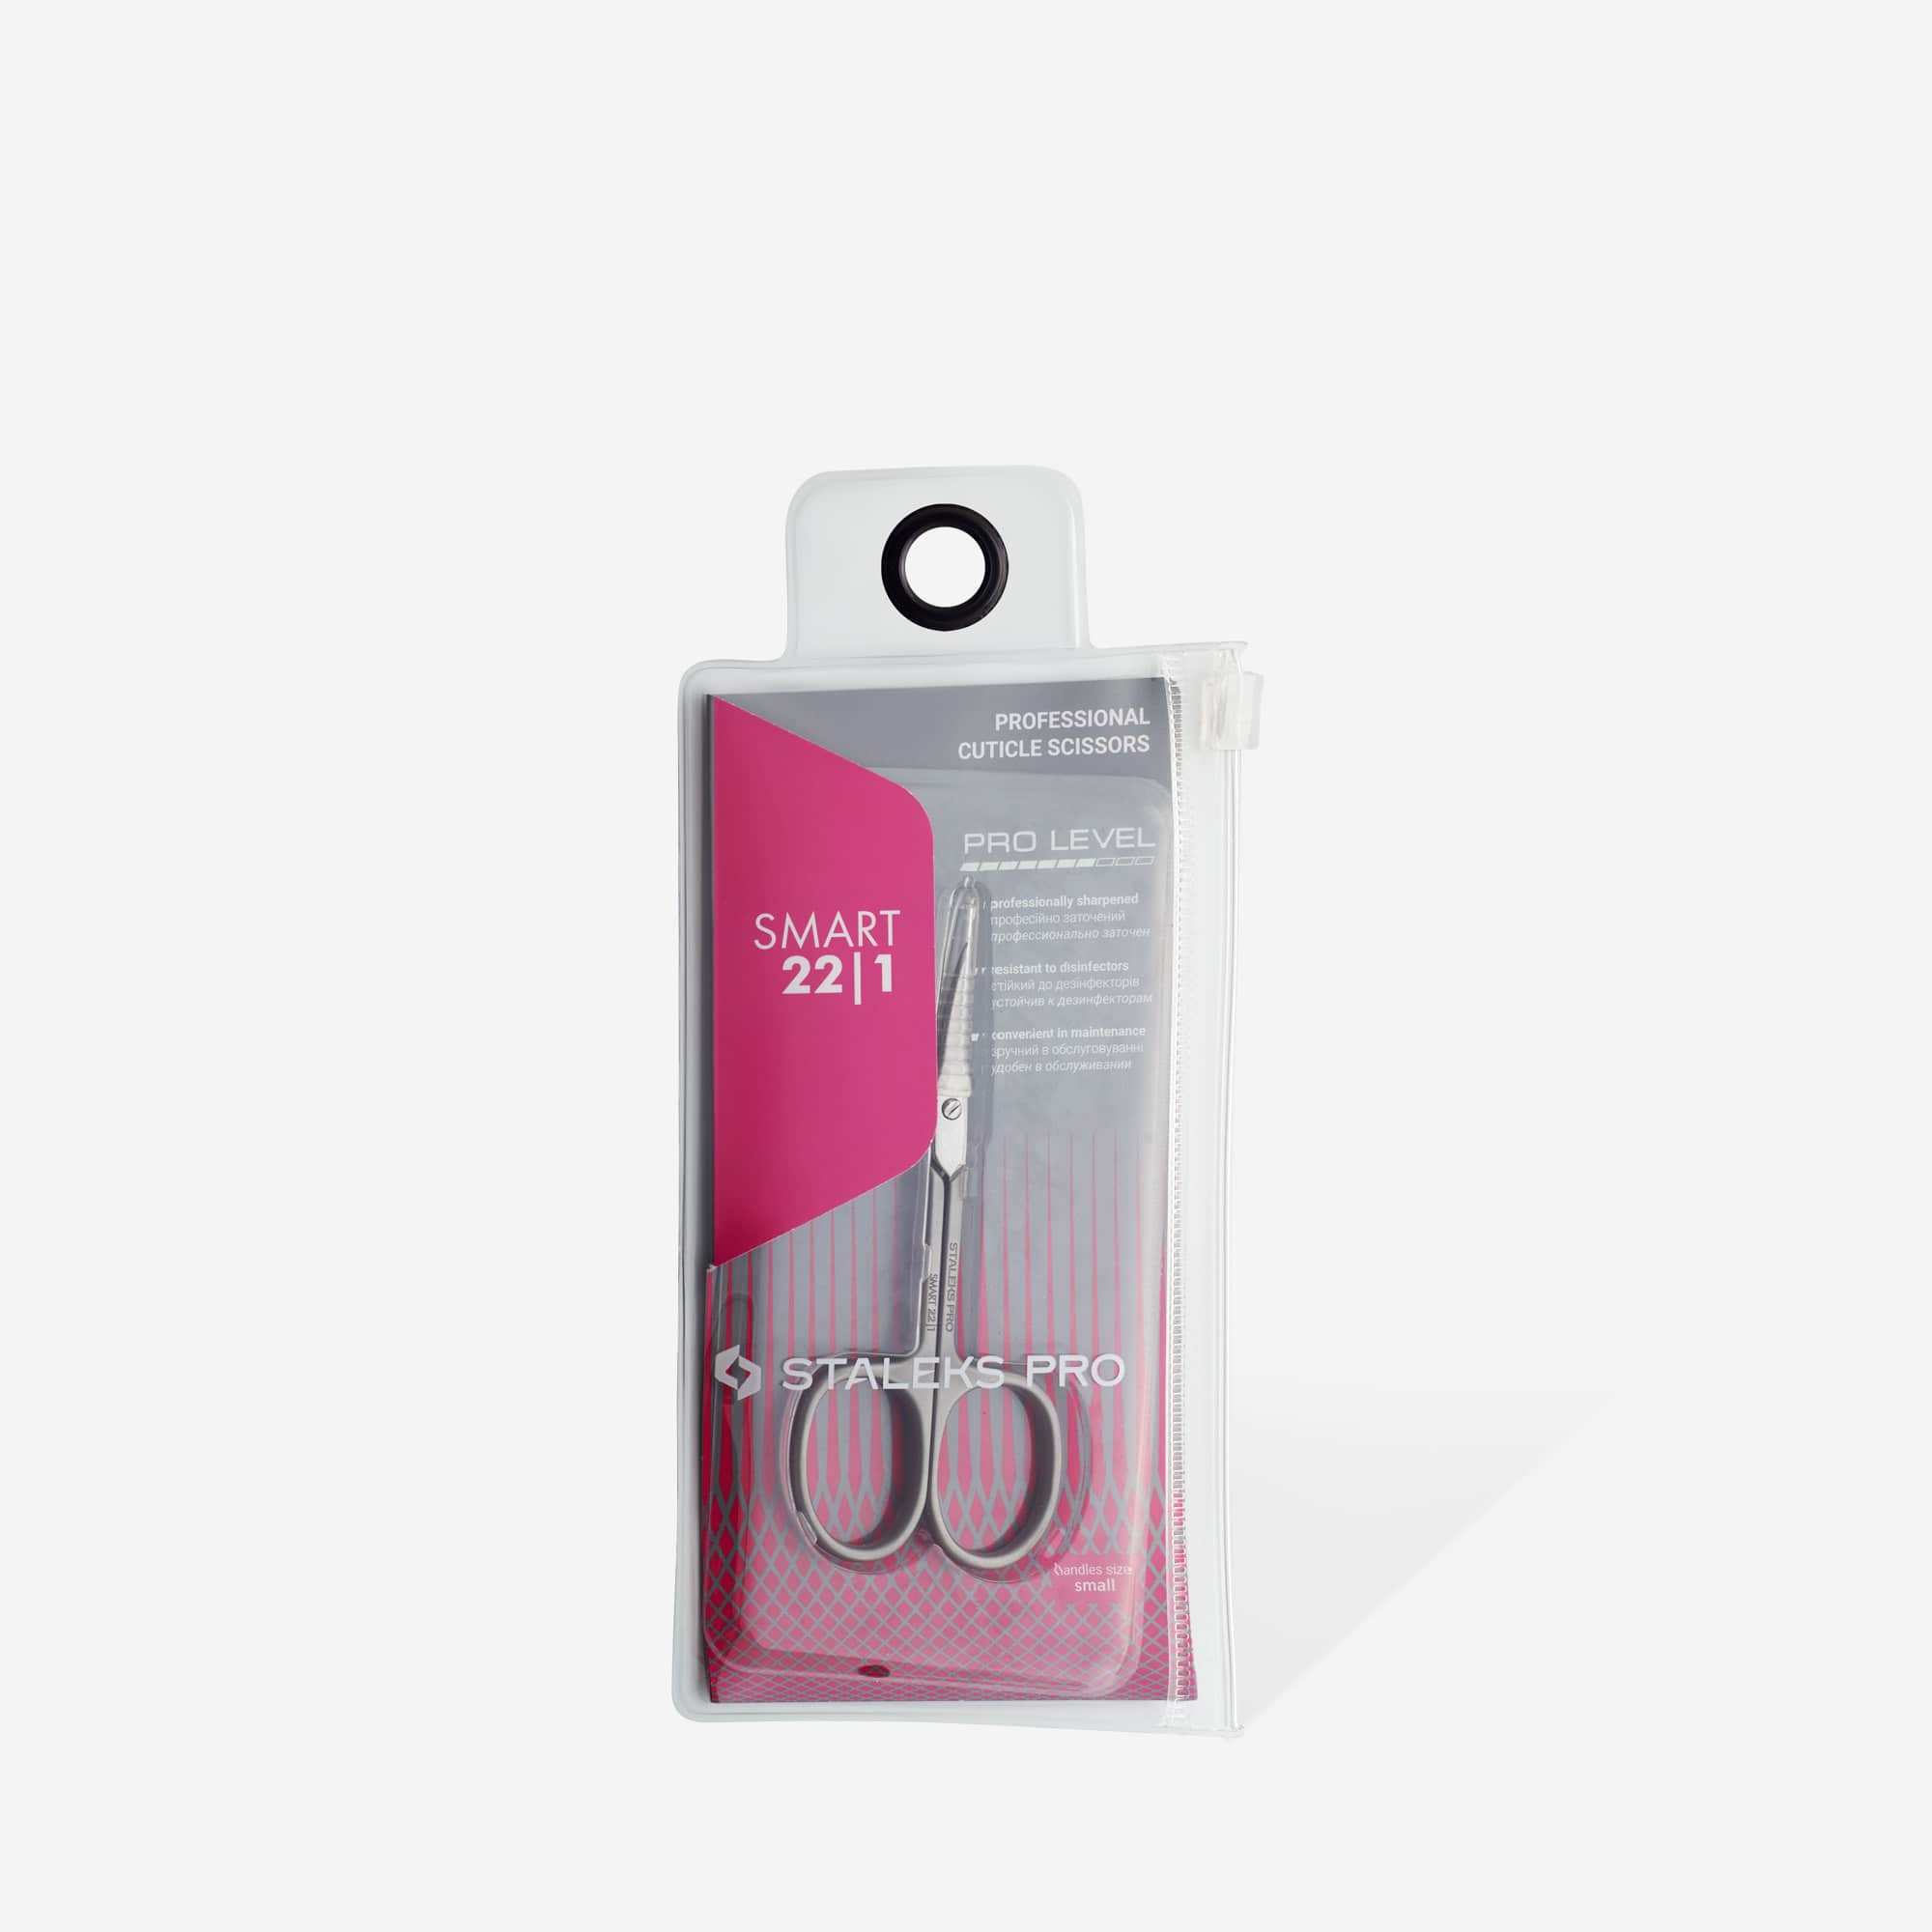 Staleks Exclusive, A professional manicure scissors with a thin